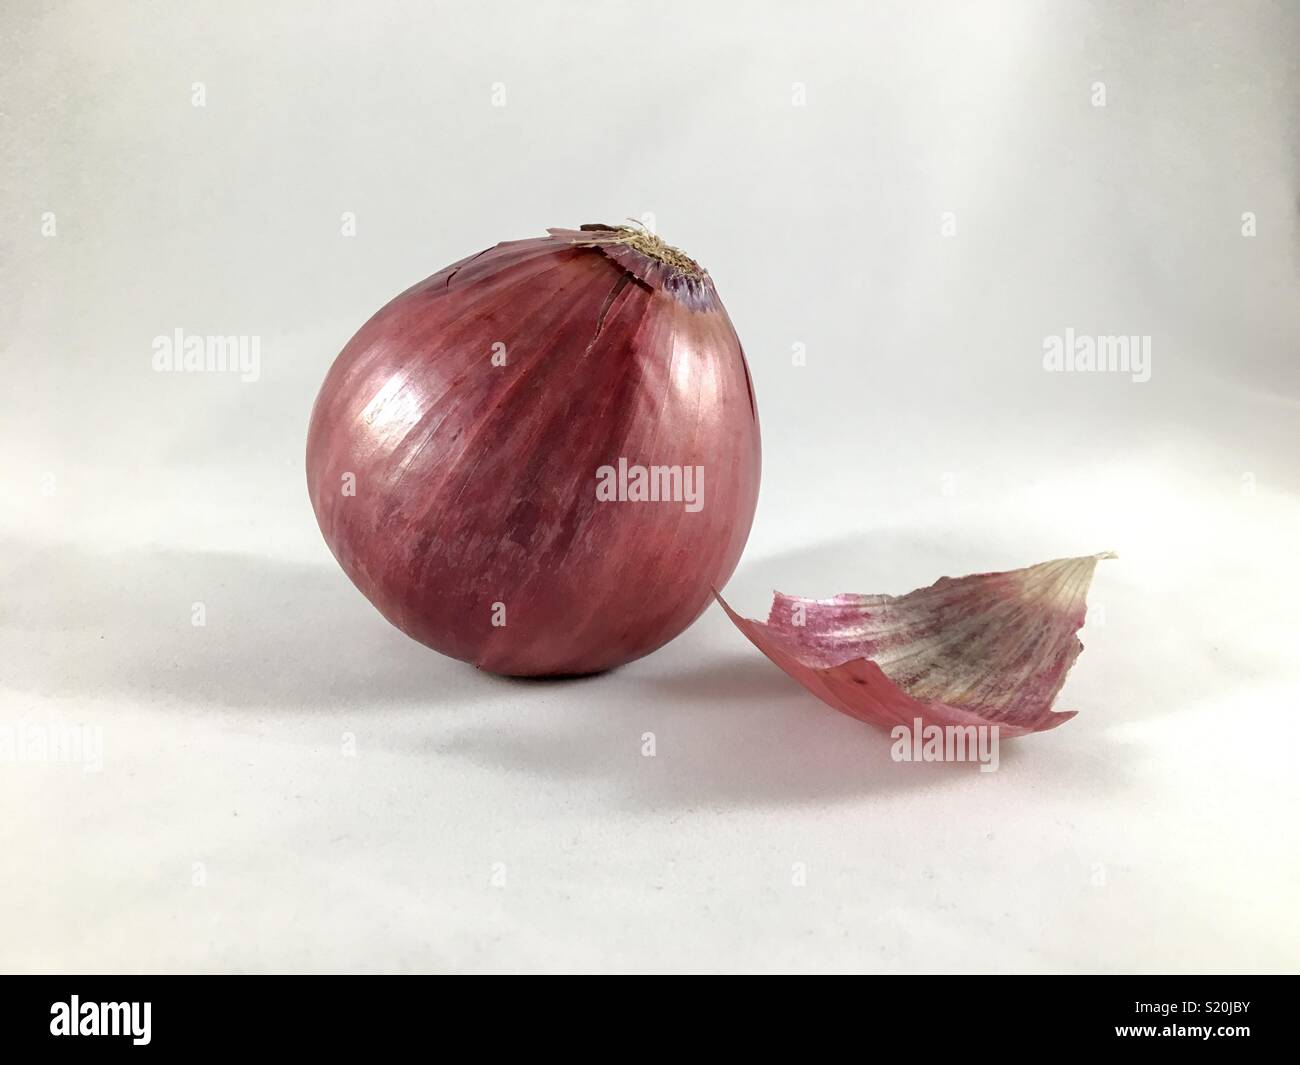 Red onion with peel Stock Photo - Alamy